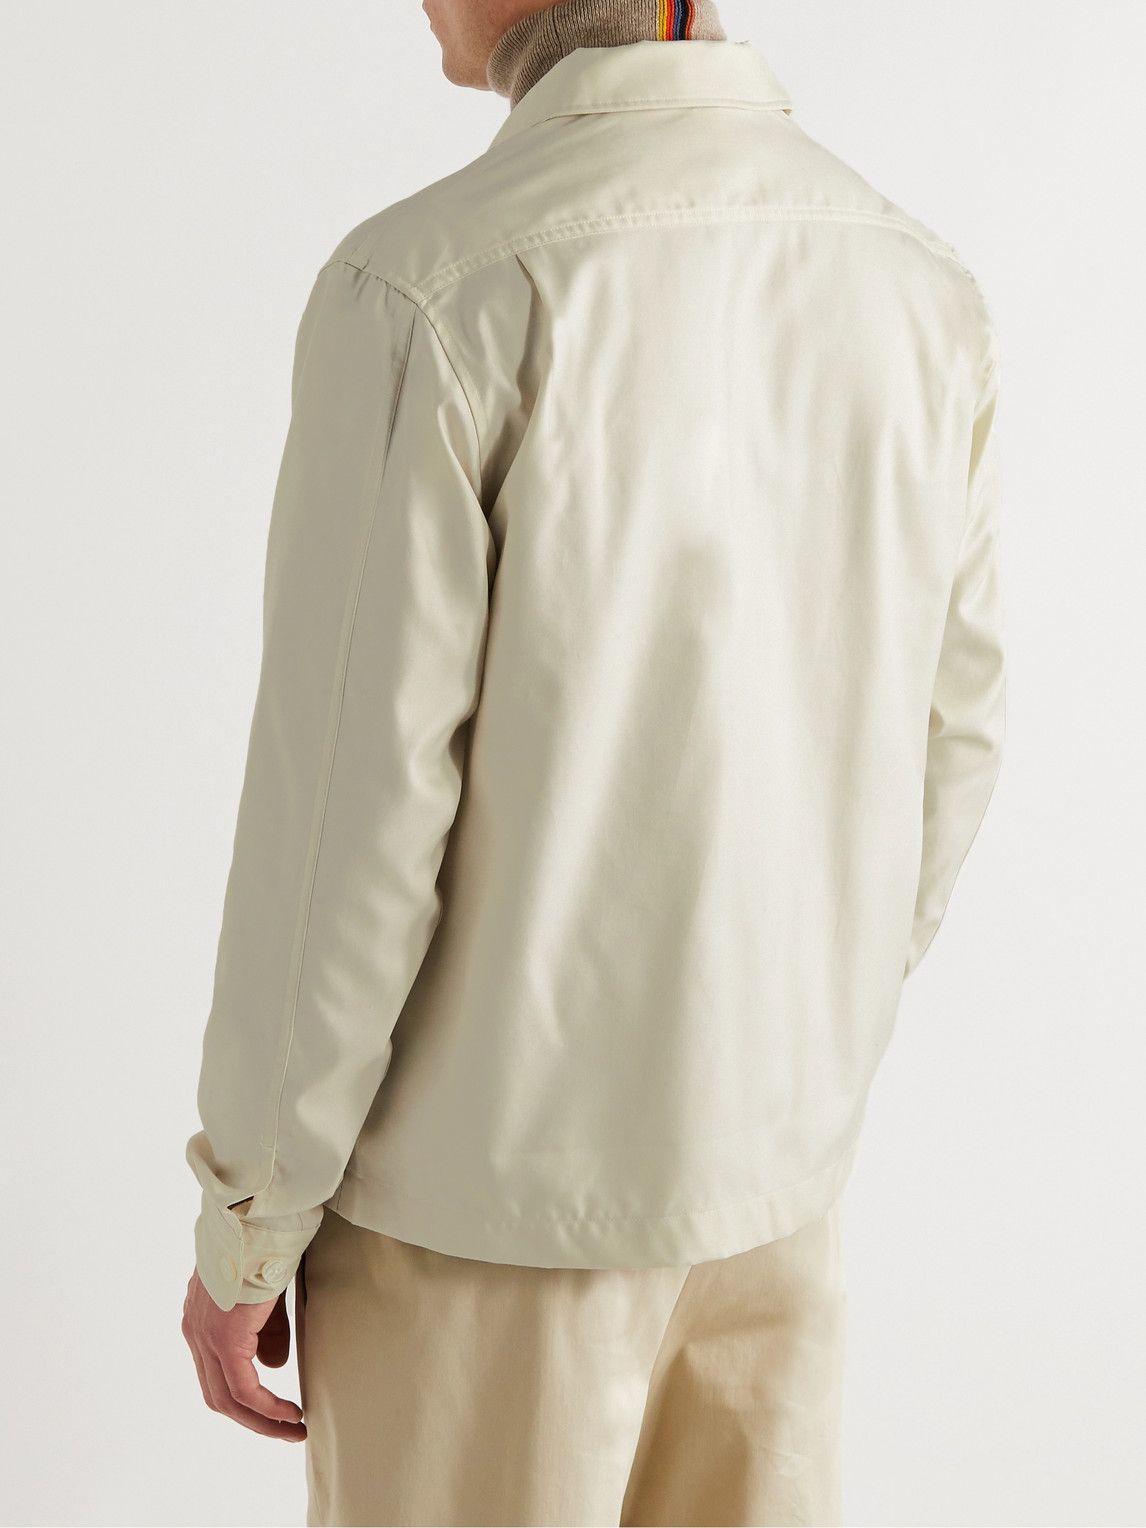 HUGO - Oversized-fit overshirt in cotton twill with patch pockets